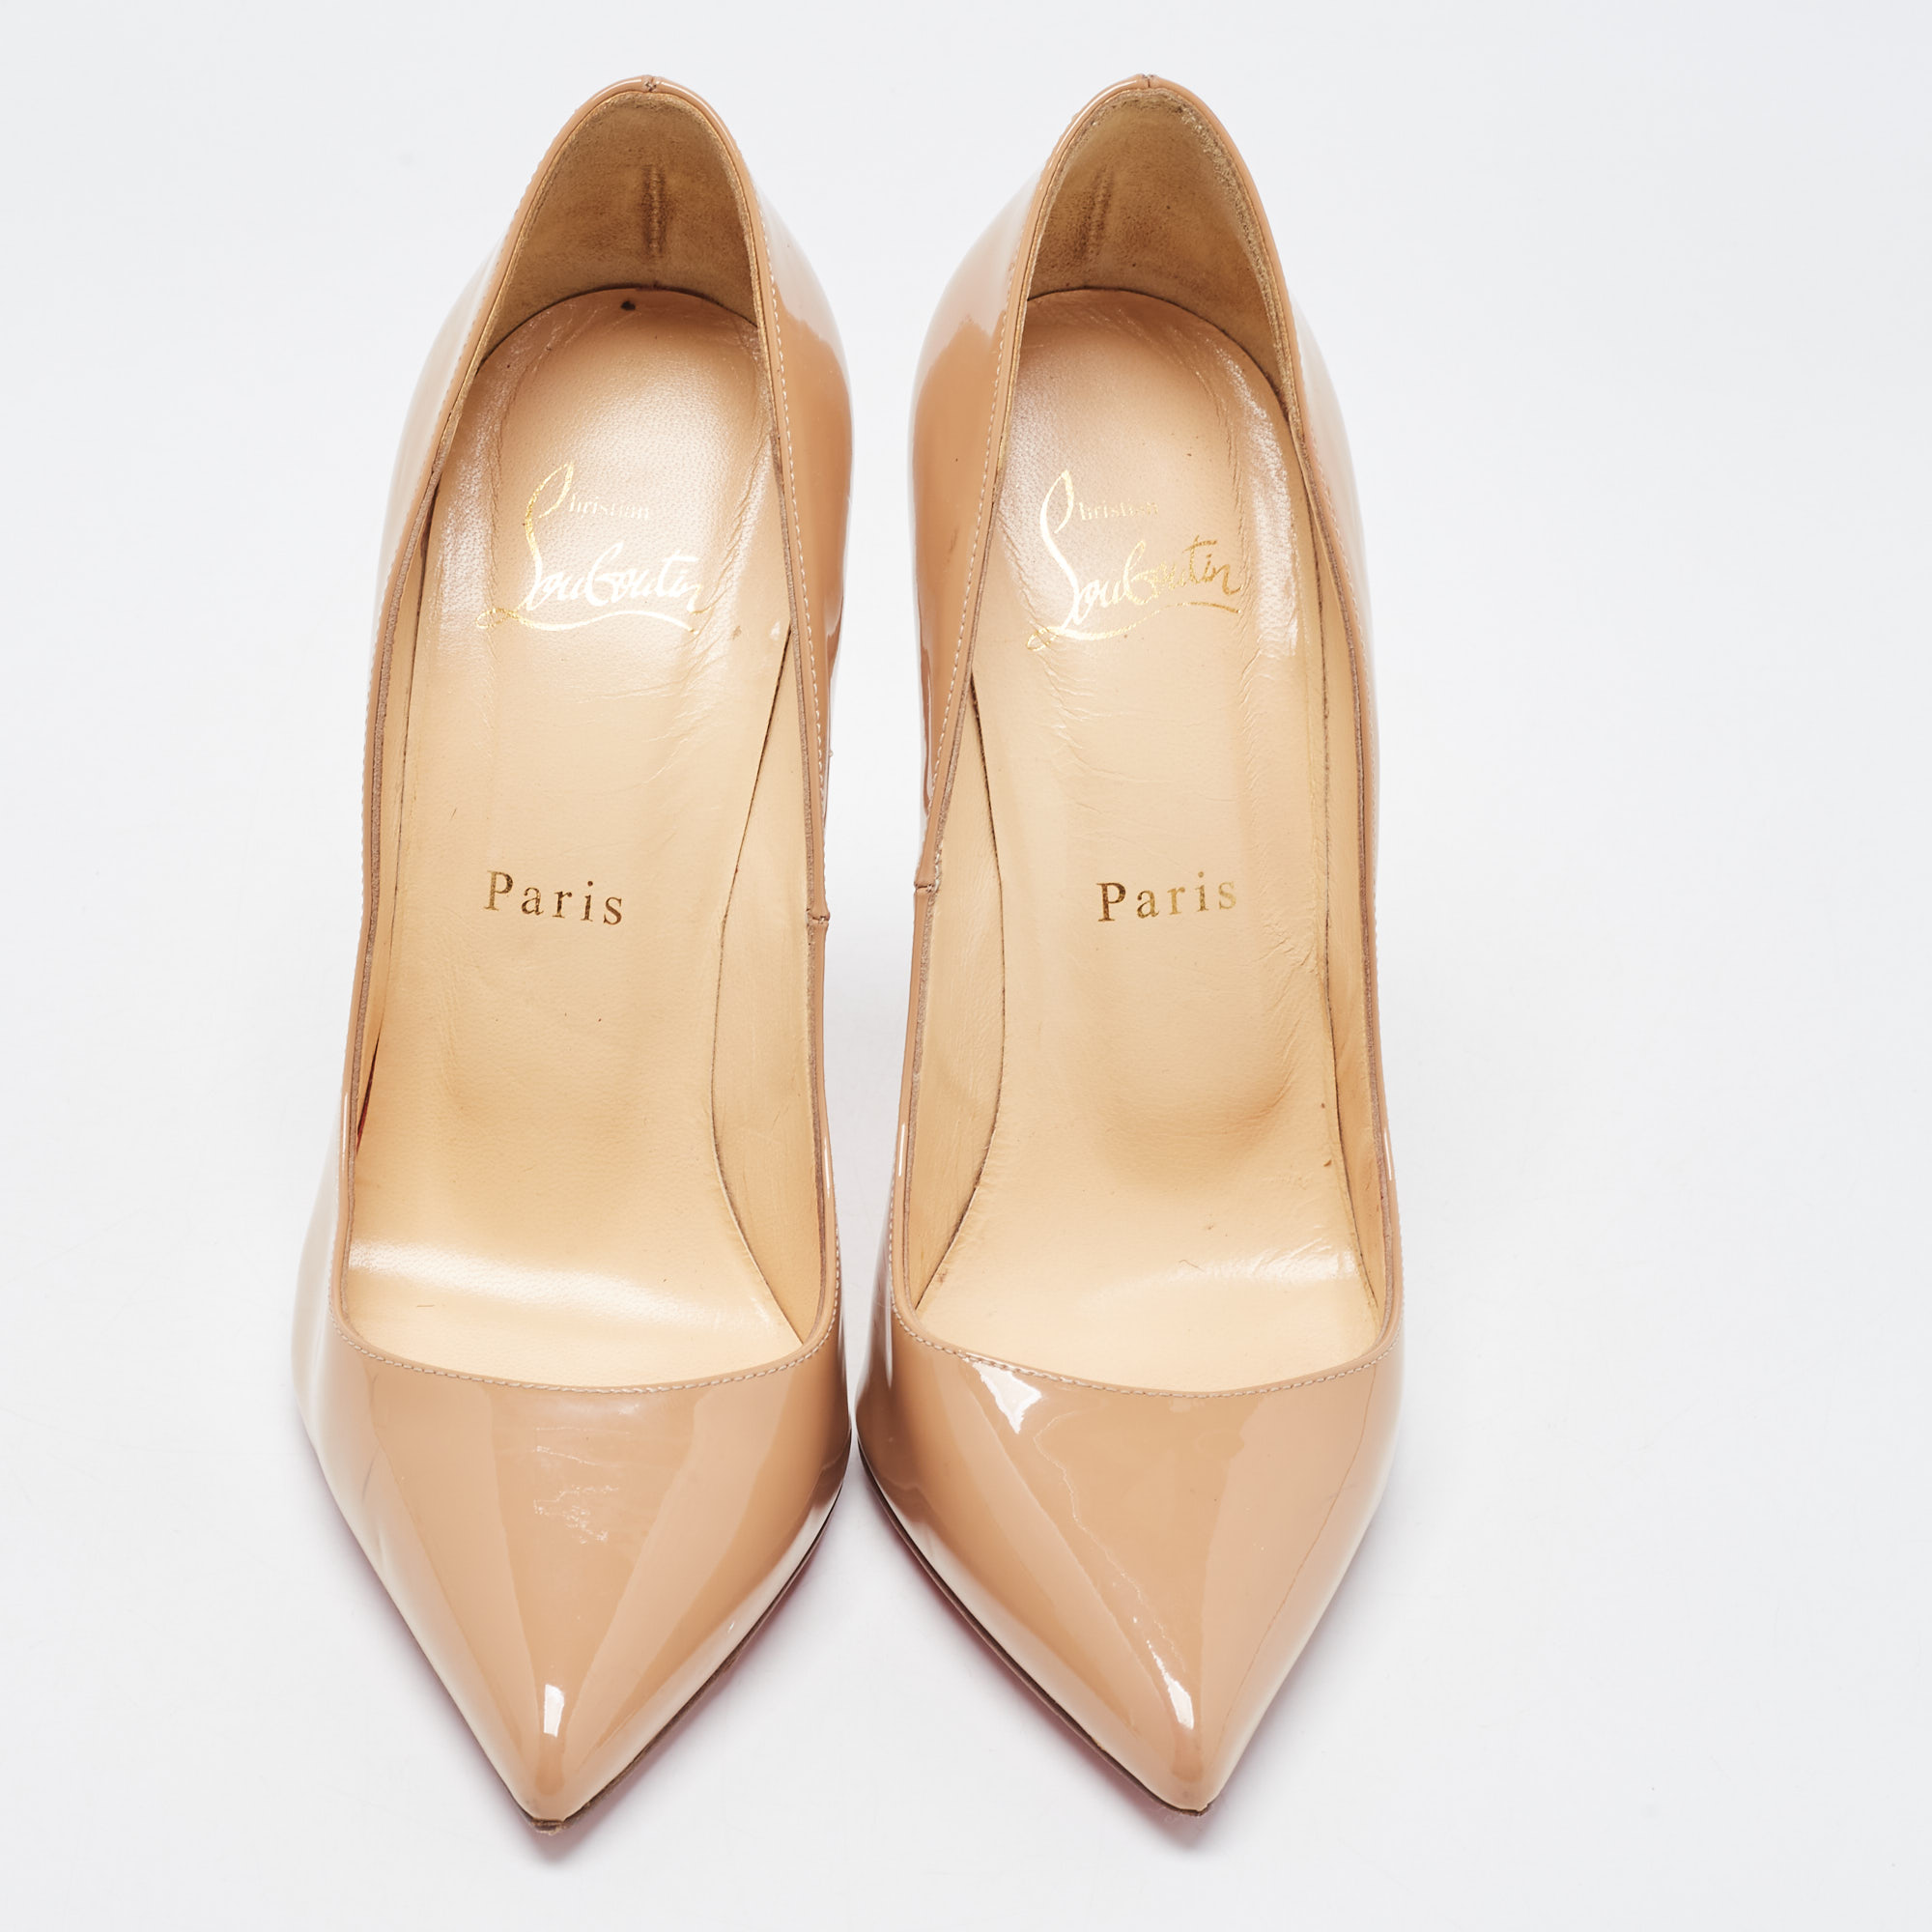 Christian Louboutin Beige Patent Leather So Kate Pumps Size 37.5